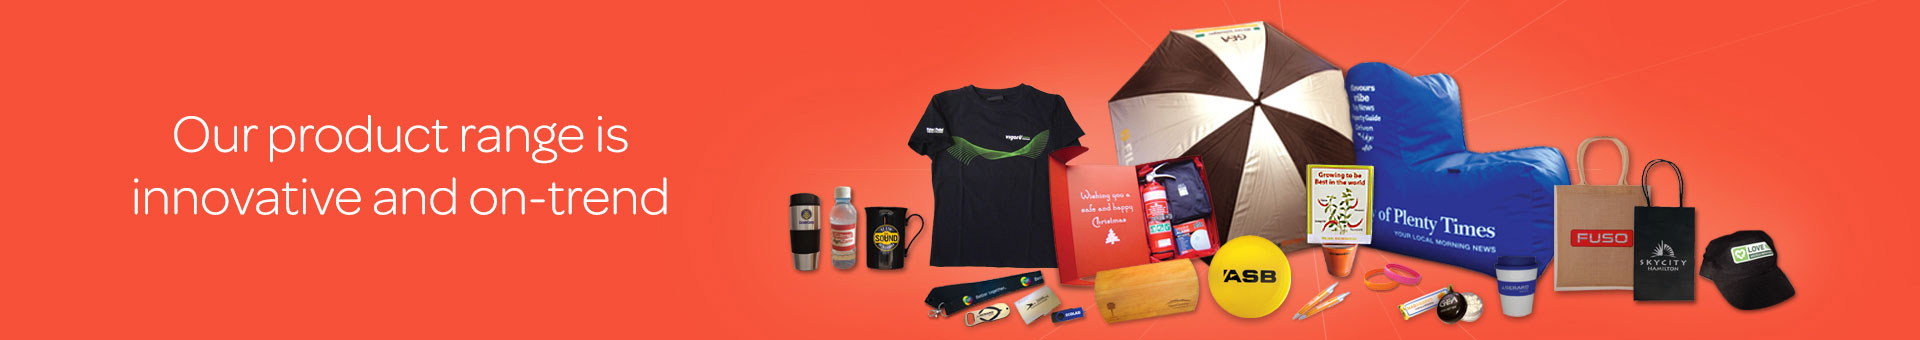 Slider 2 Product Range Promotional Products, Corporate Gifts and Branded Apparel